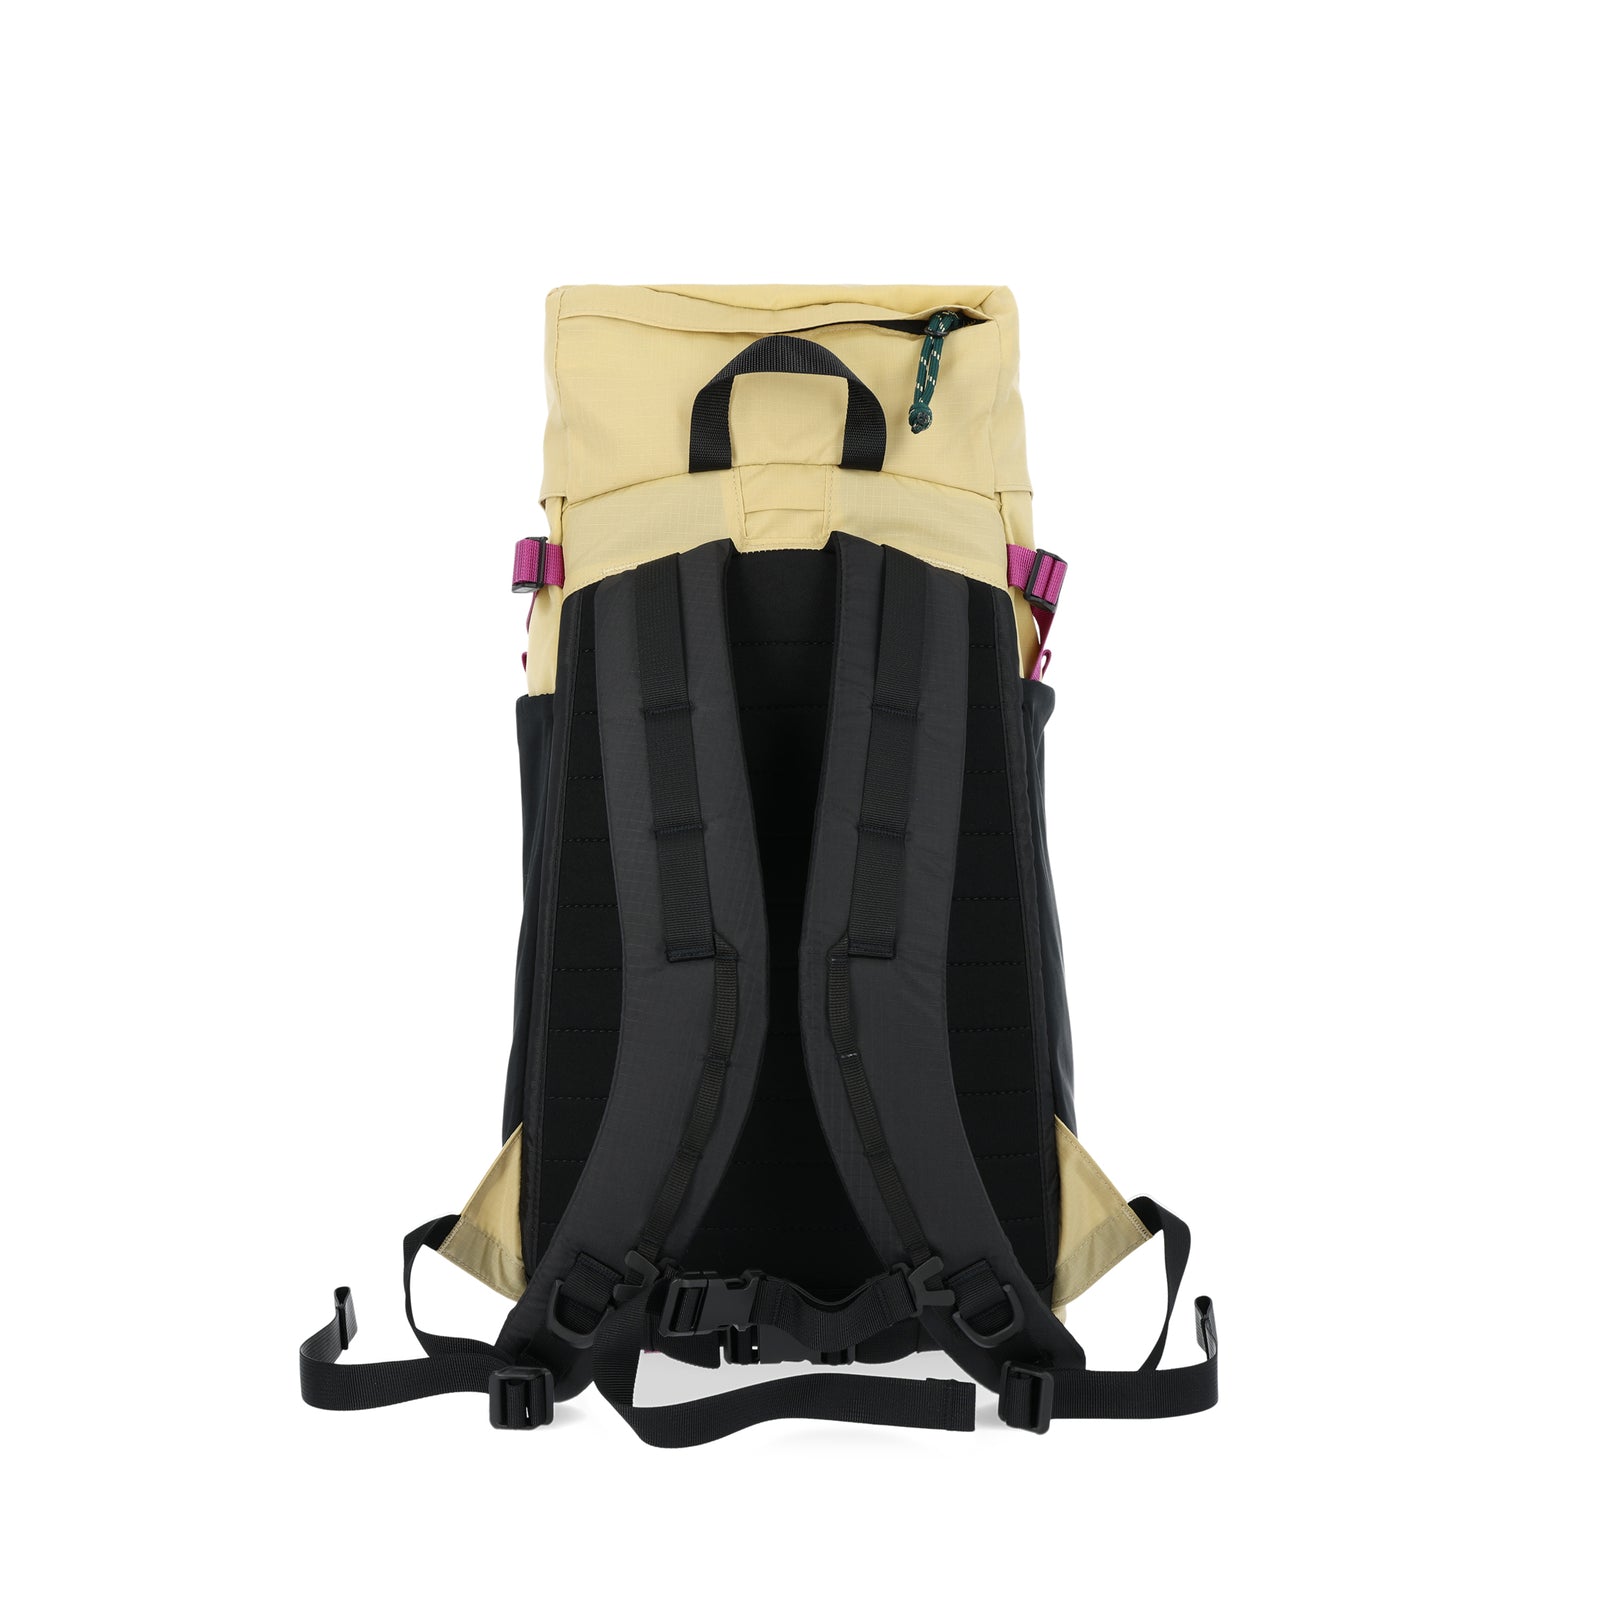 General shot of padded backpack straps and sternum strap on back of Topo Designs Mountain Pack 16L hiking backpack with internal laptop sleeve in lightweight recycled nylon hemp bone brown.